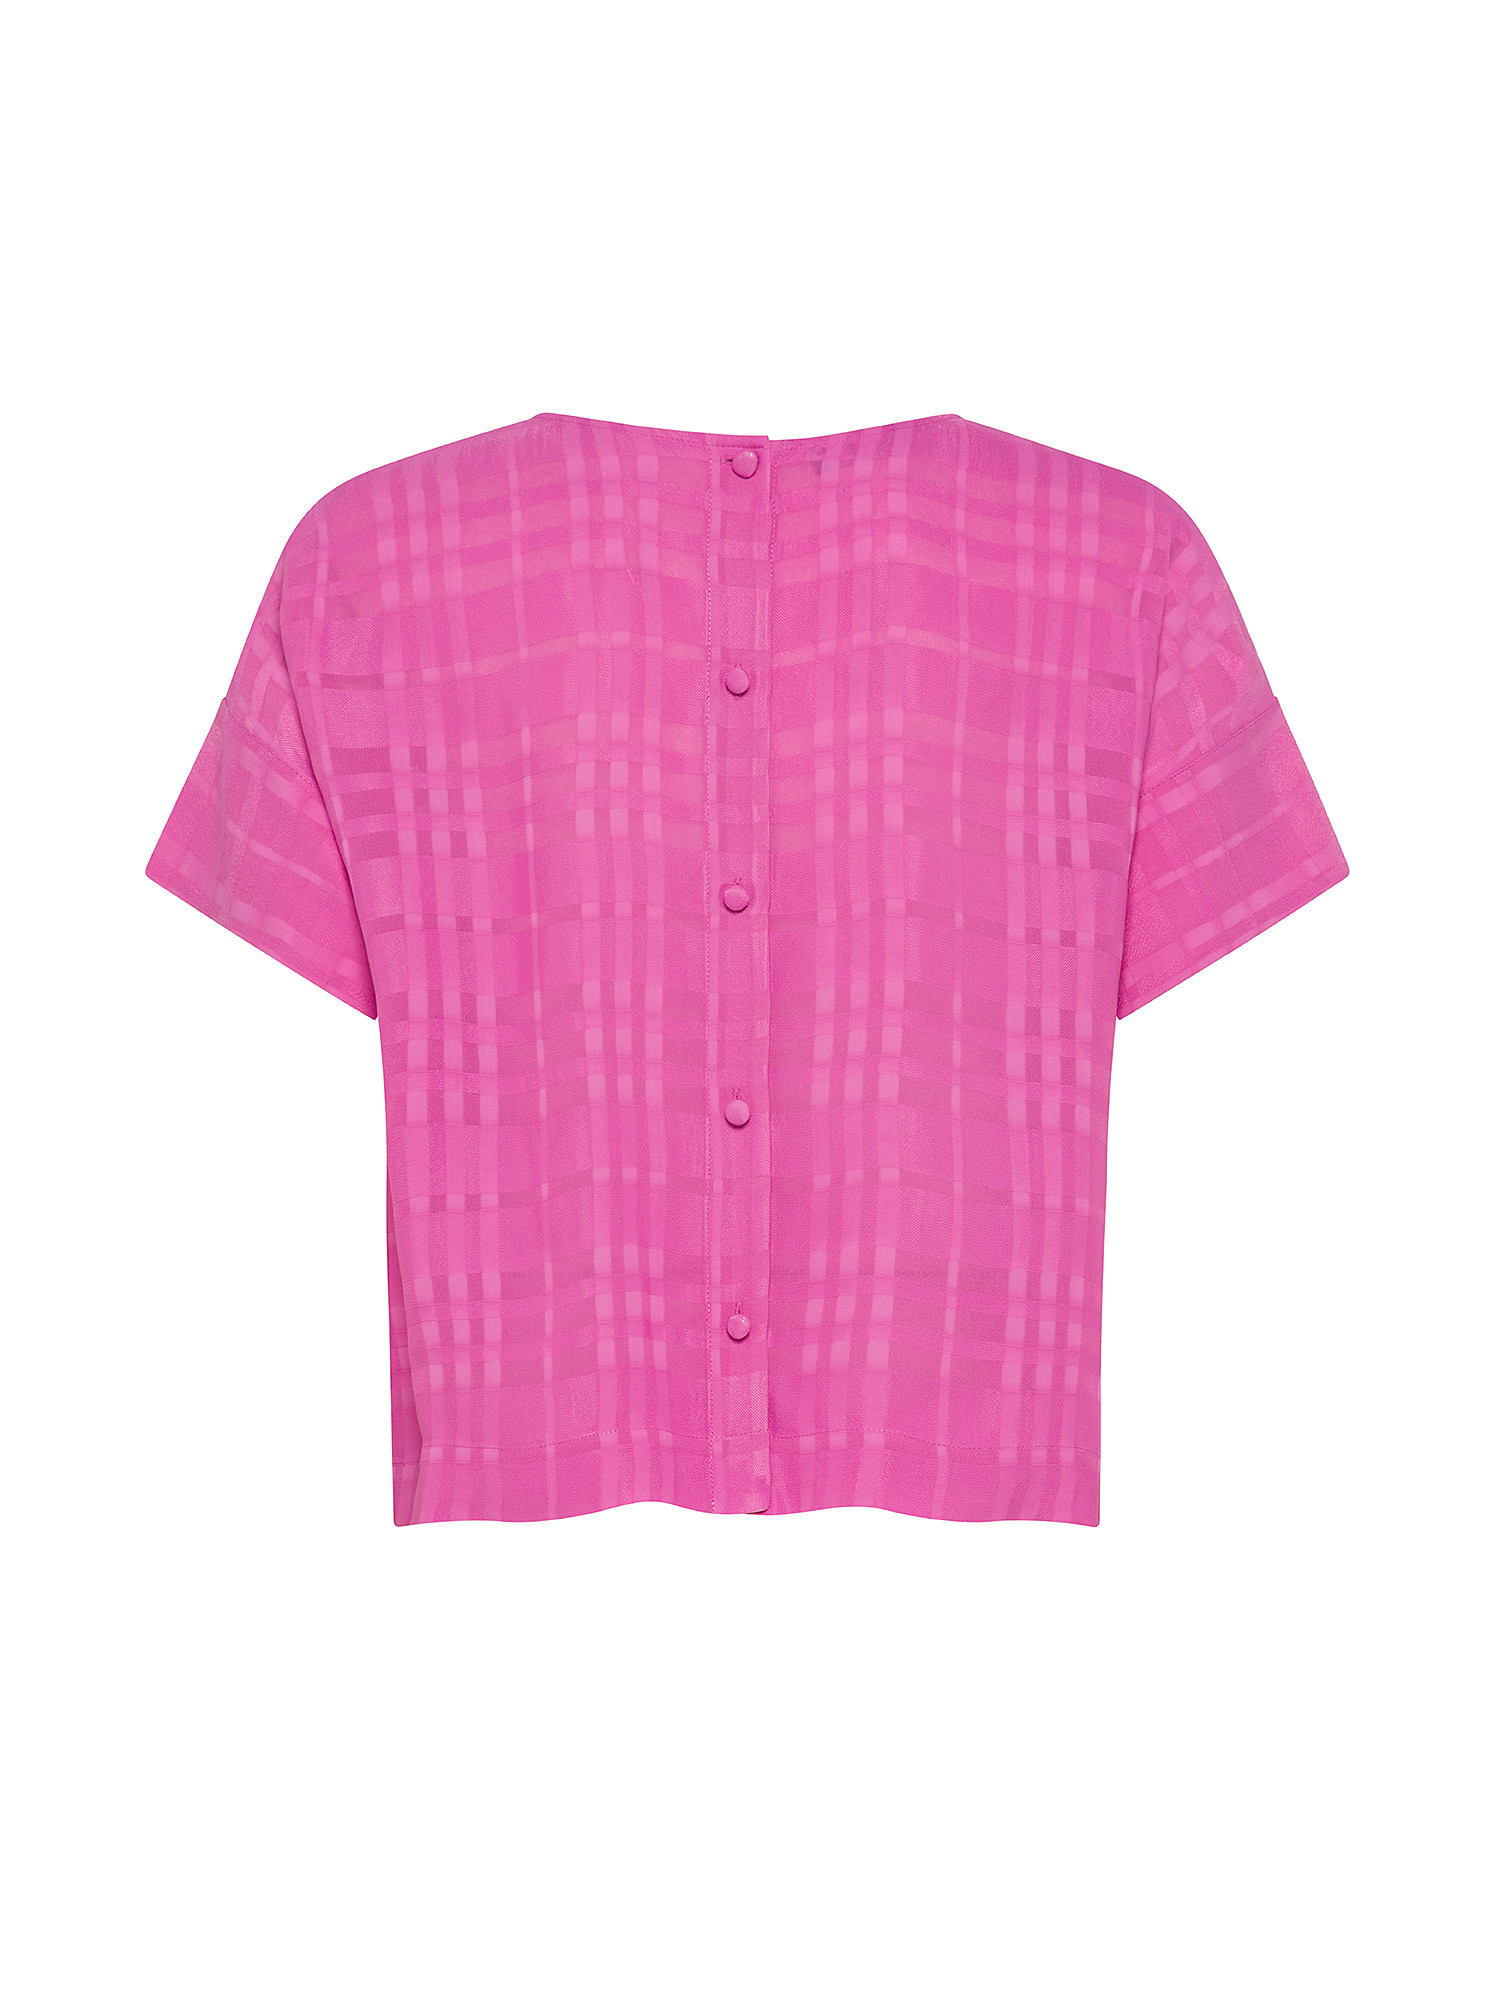 Emporio Armani - Patterned top, Pink Fuchsia, large image number 1